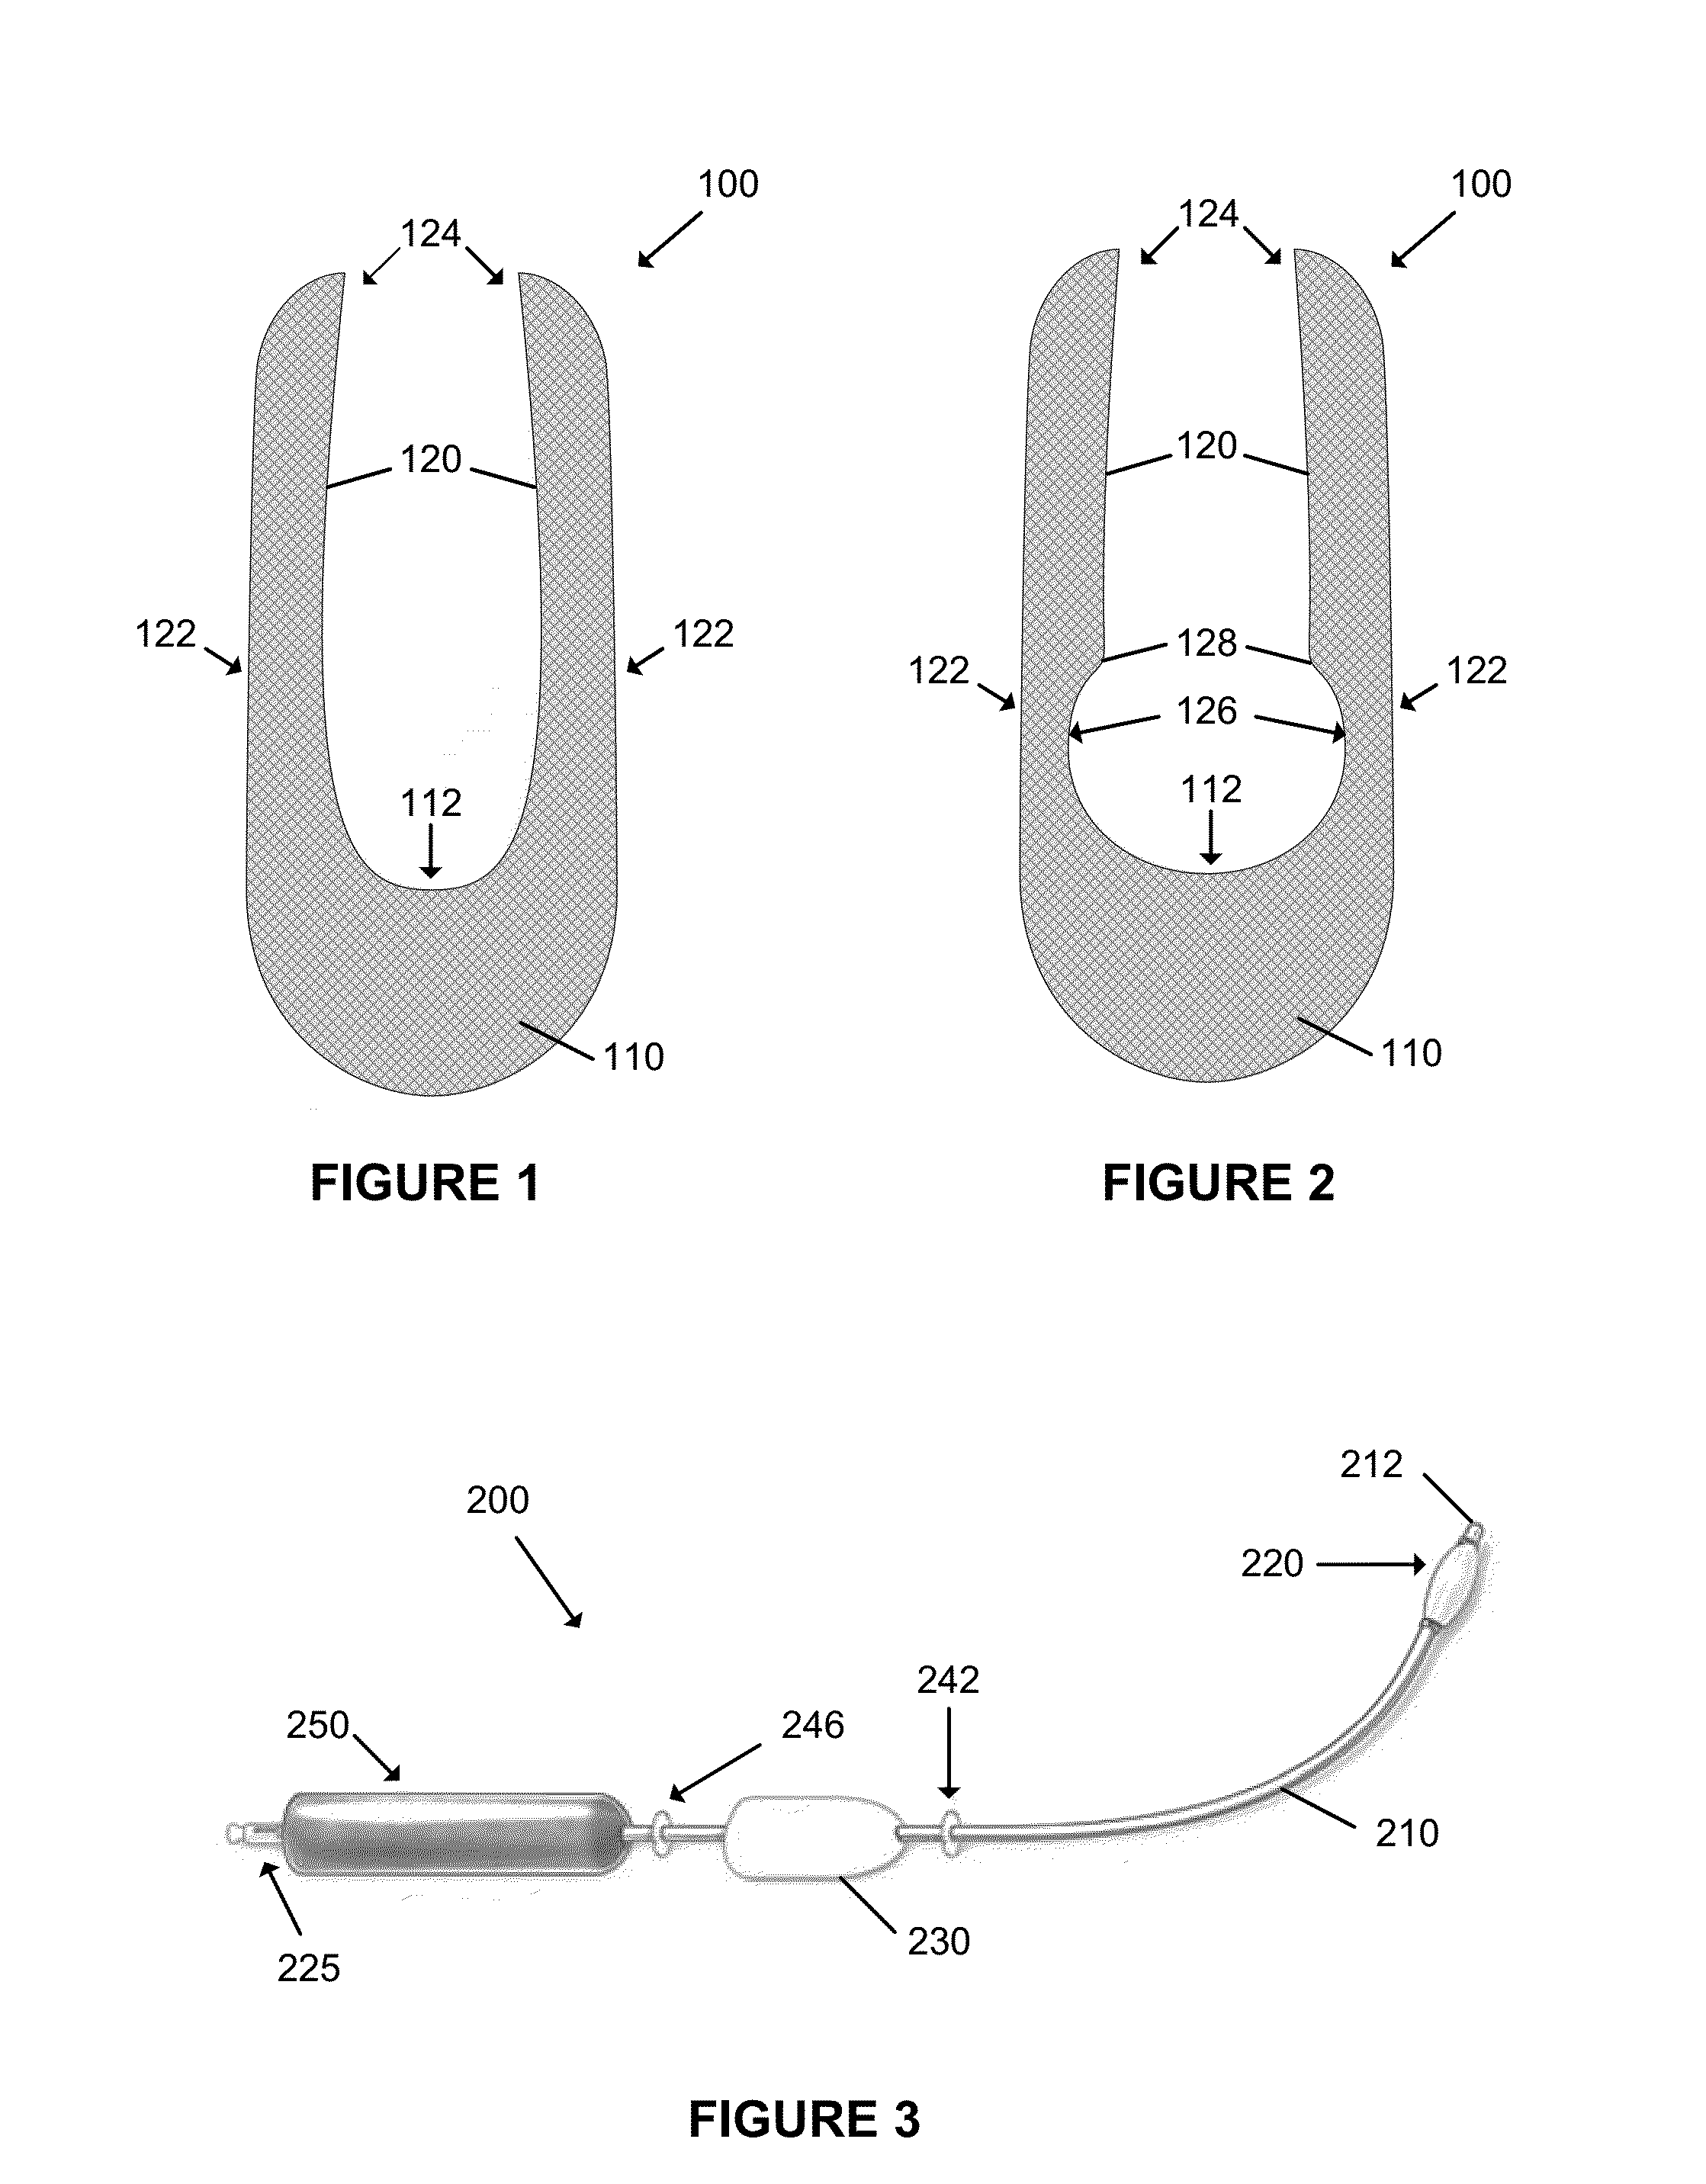 Surgical methods and devices for treatment of prolapsed uterus